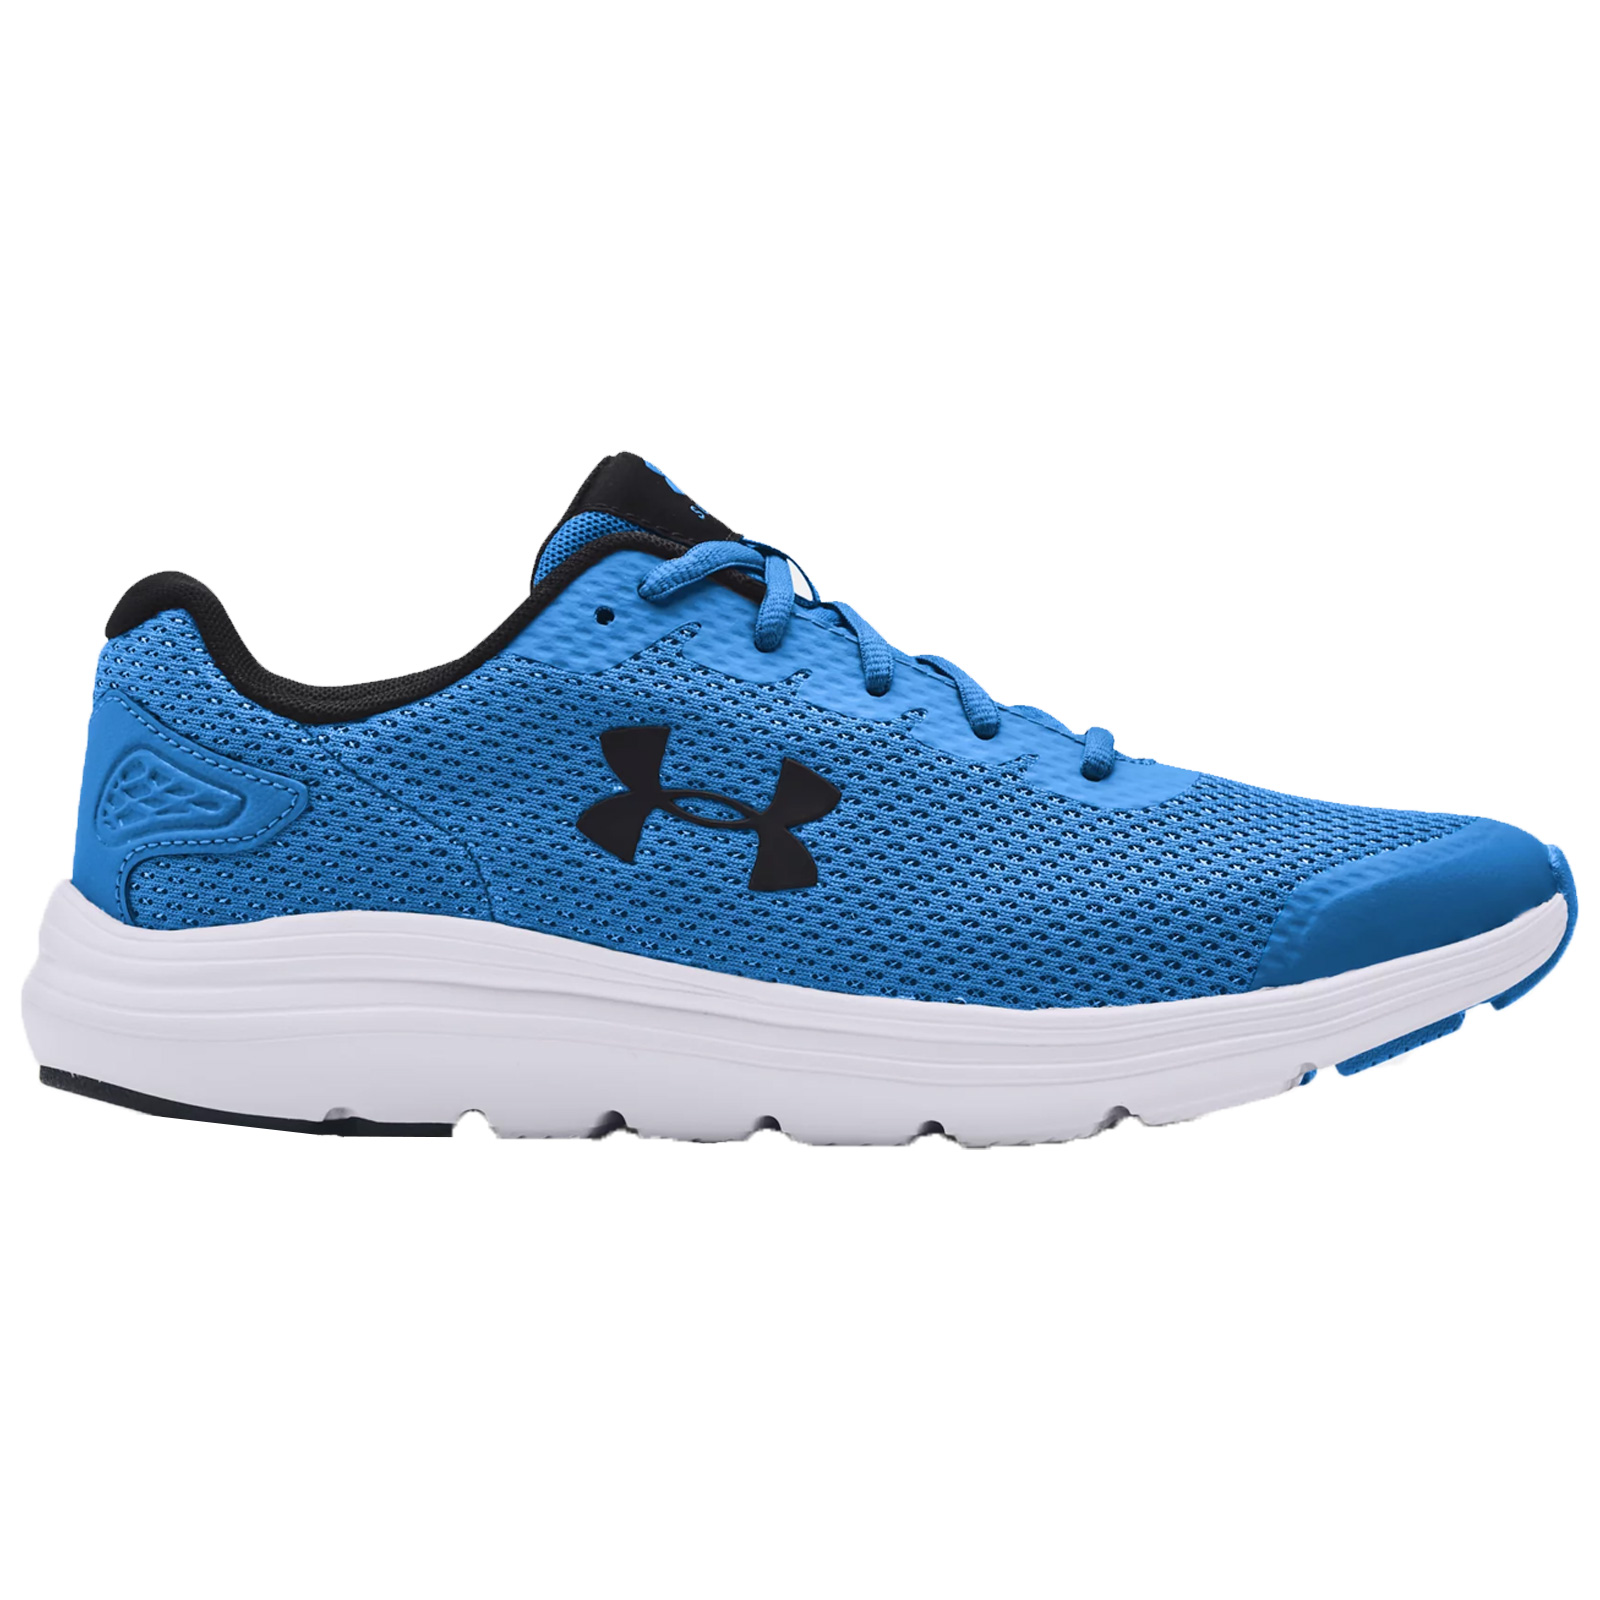 Under Armour Mens Surge 2 Trainers UA Gym Running Shoes Walking ...